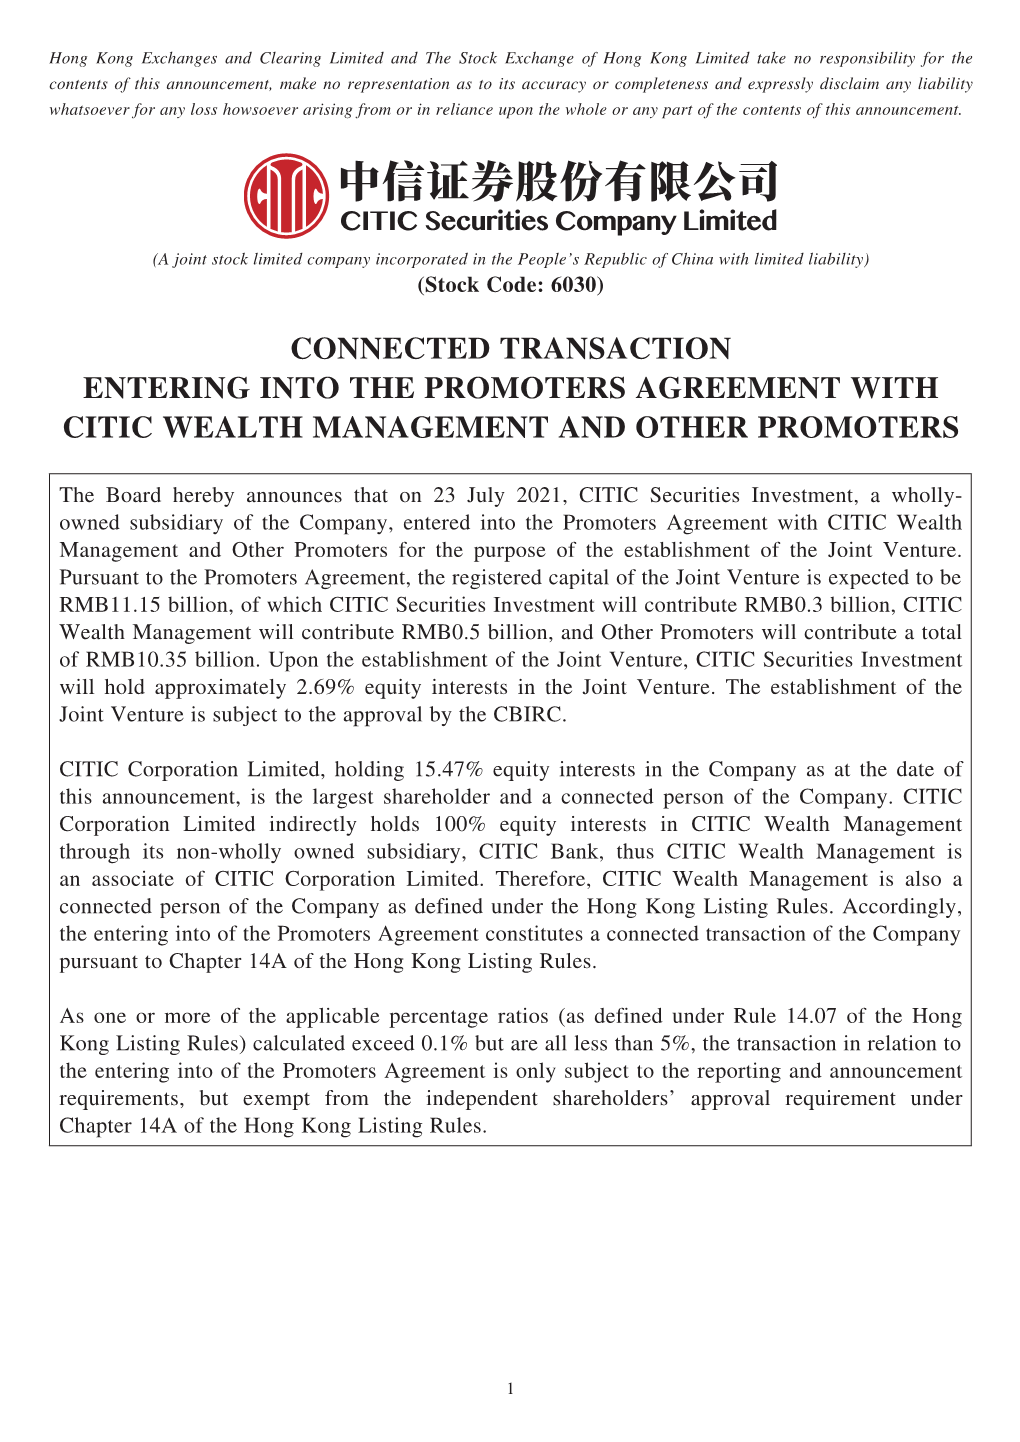 Connected Transaction Entering Into the Promoters Agreement with Citic Wealth Management and Other Promoters